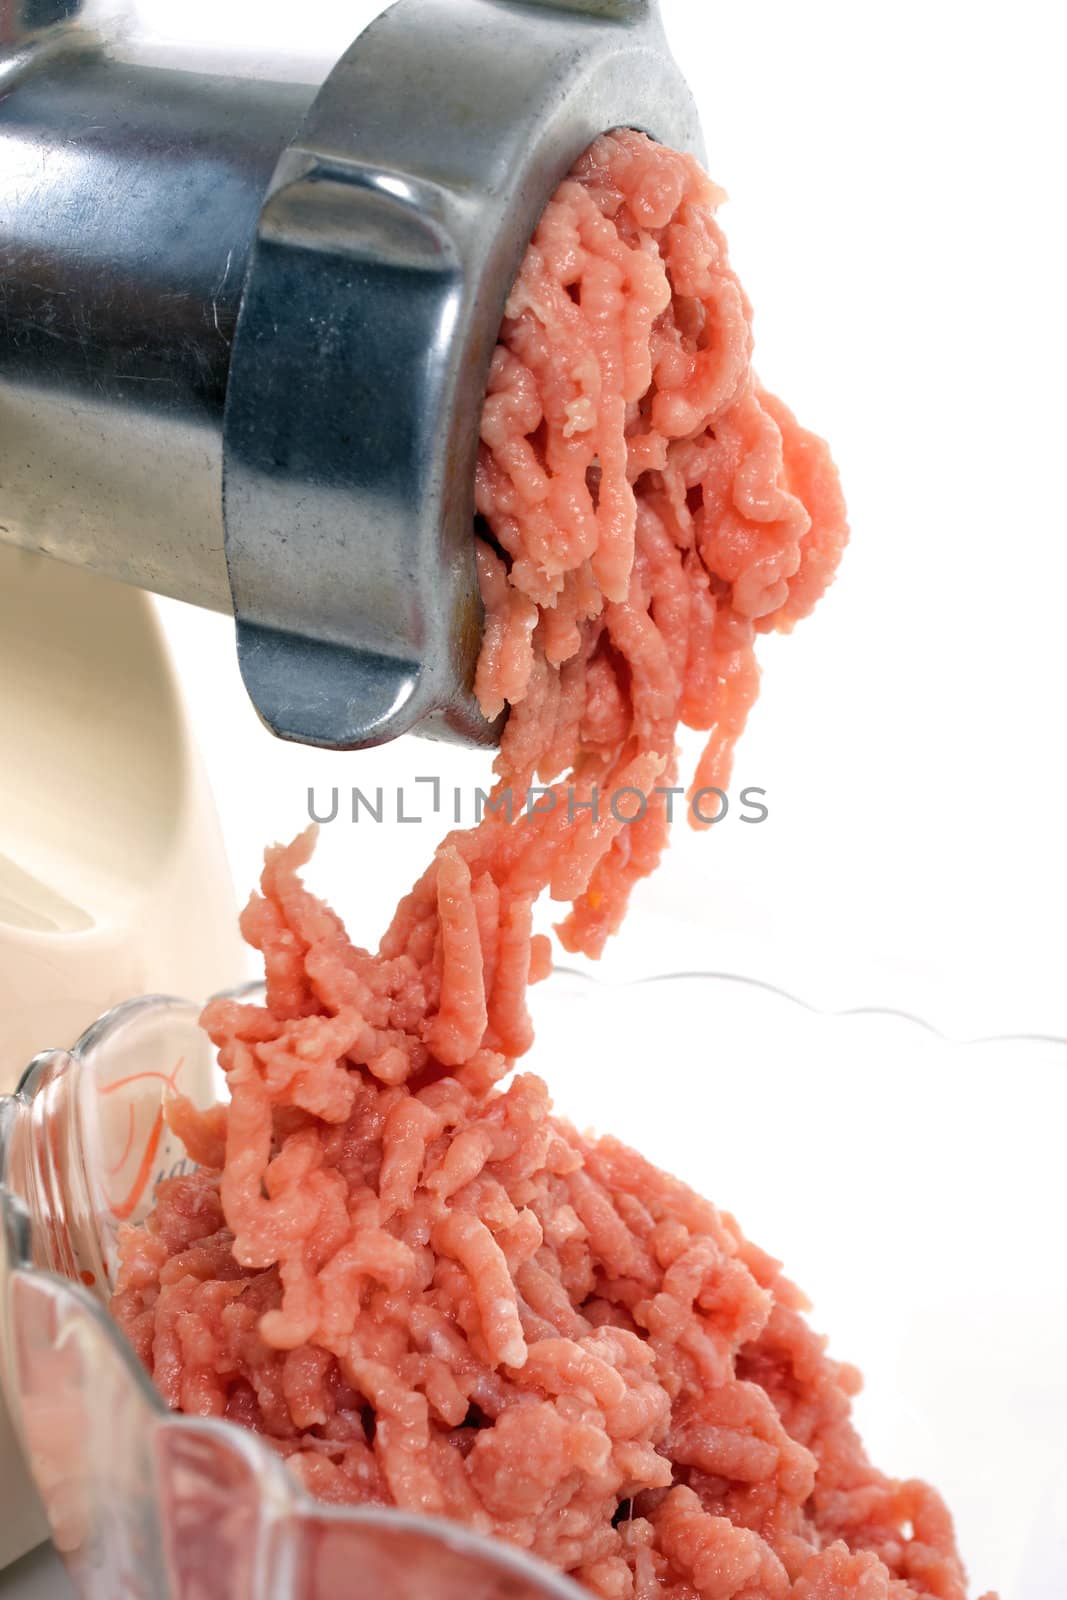 Mince meat with old device close-up